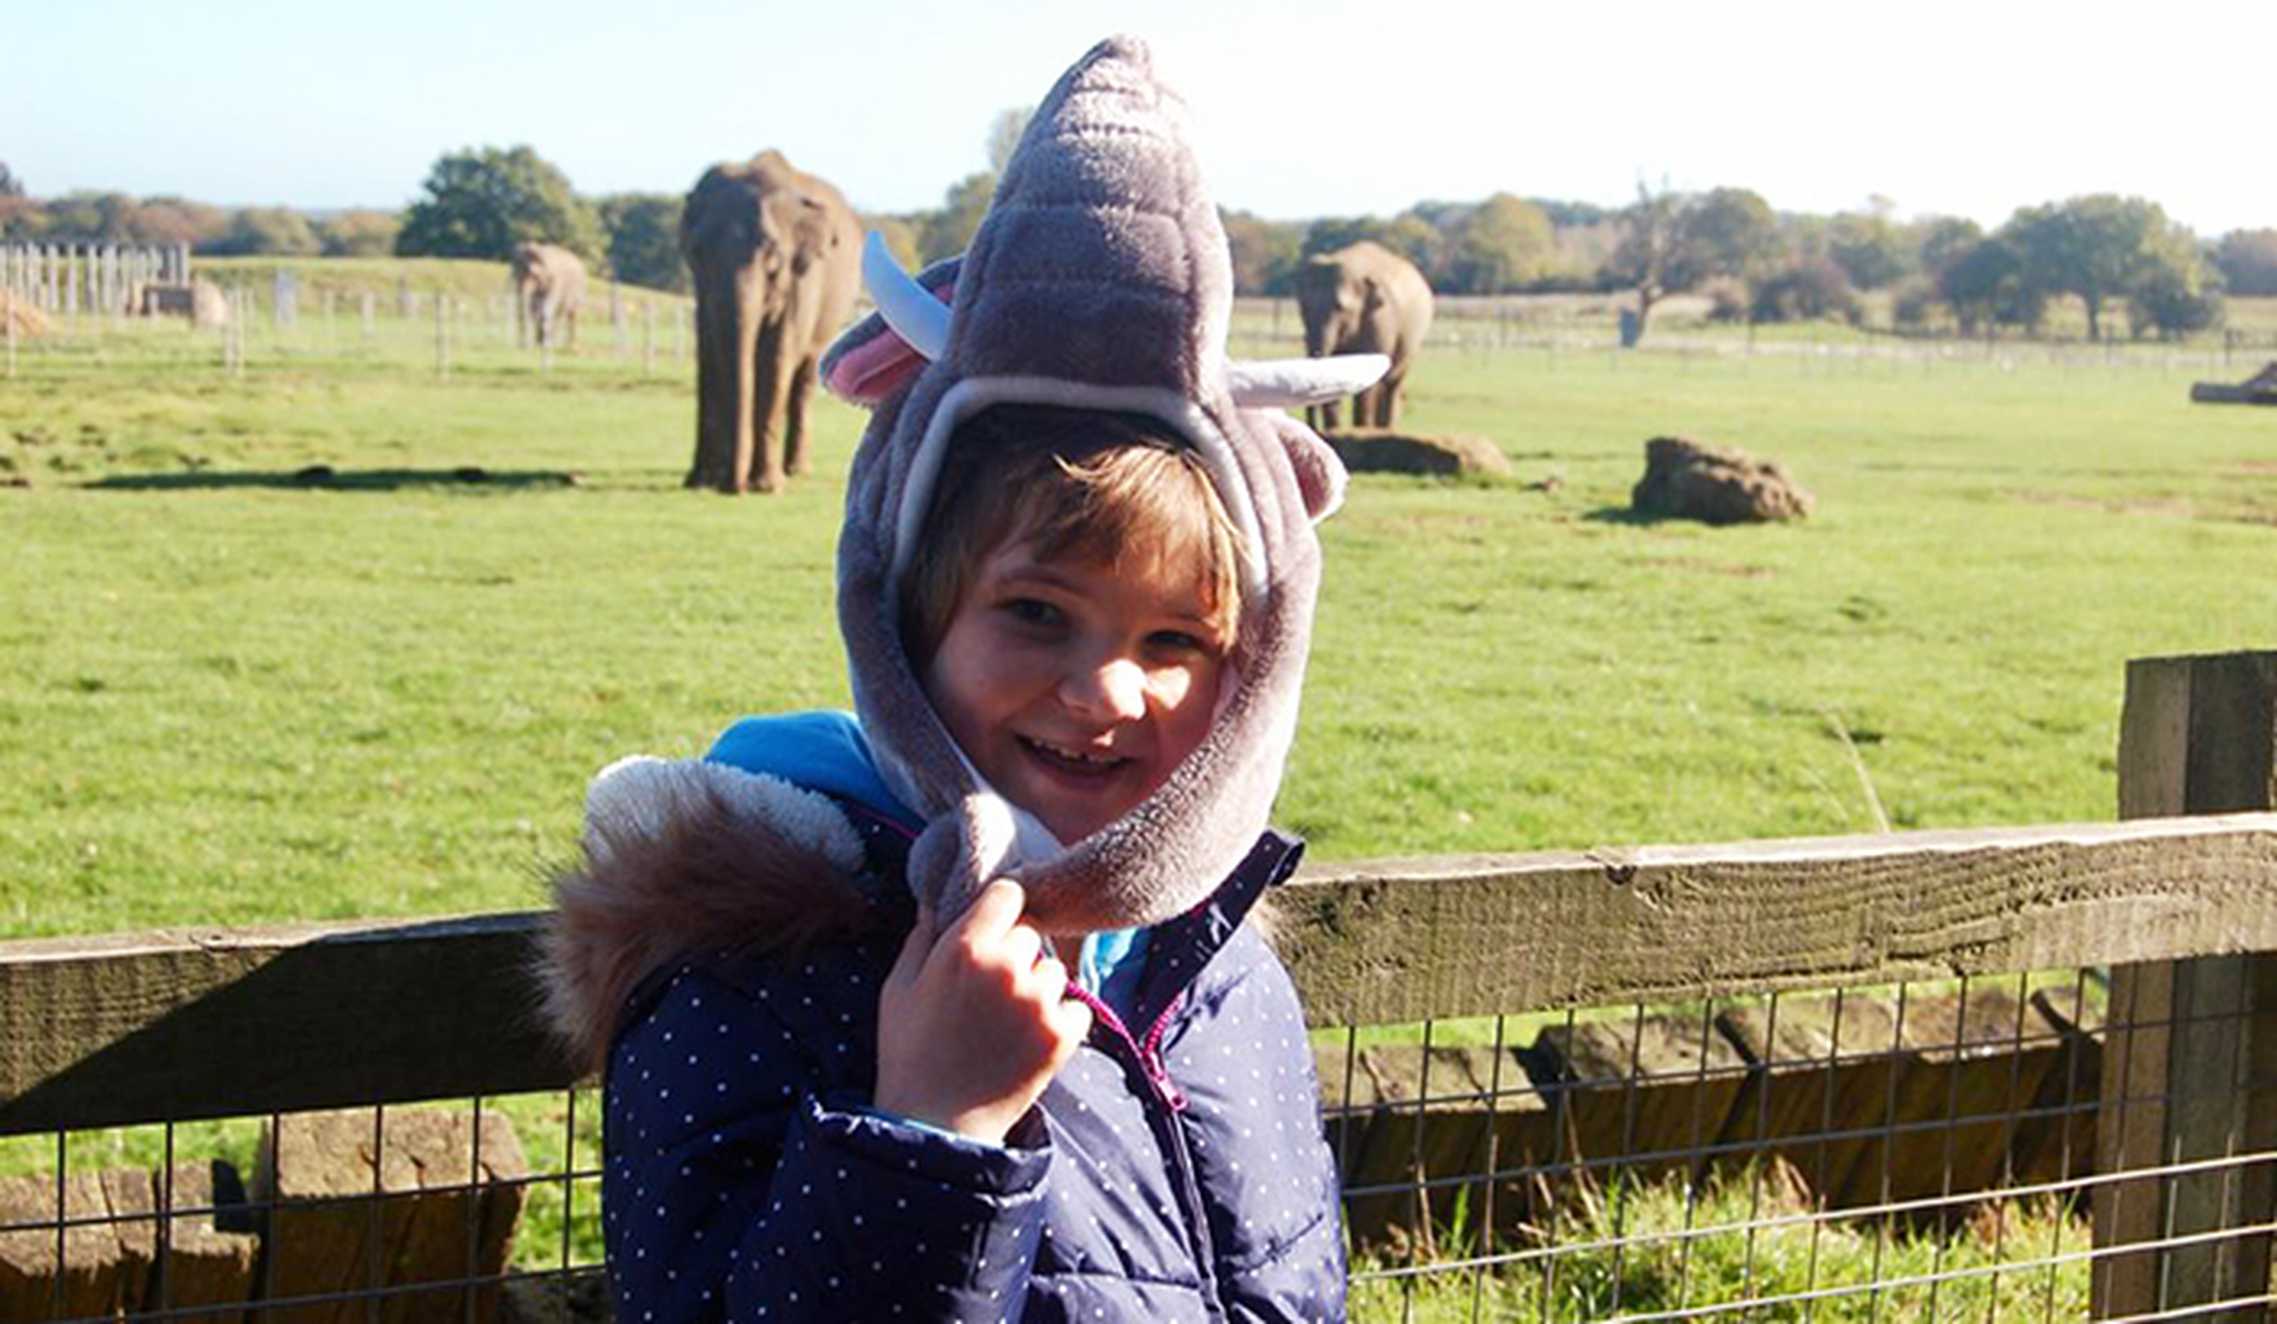 Florence at the zoo wearing her elephant hat